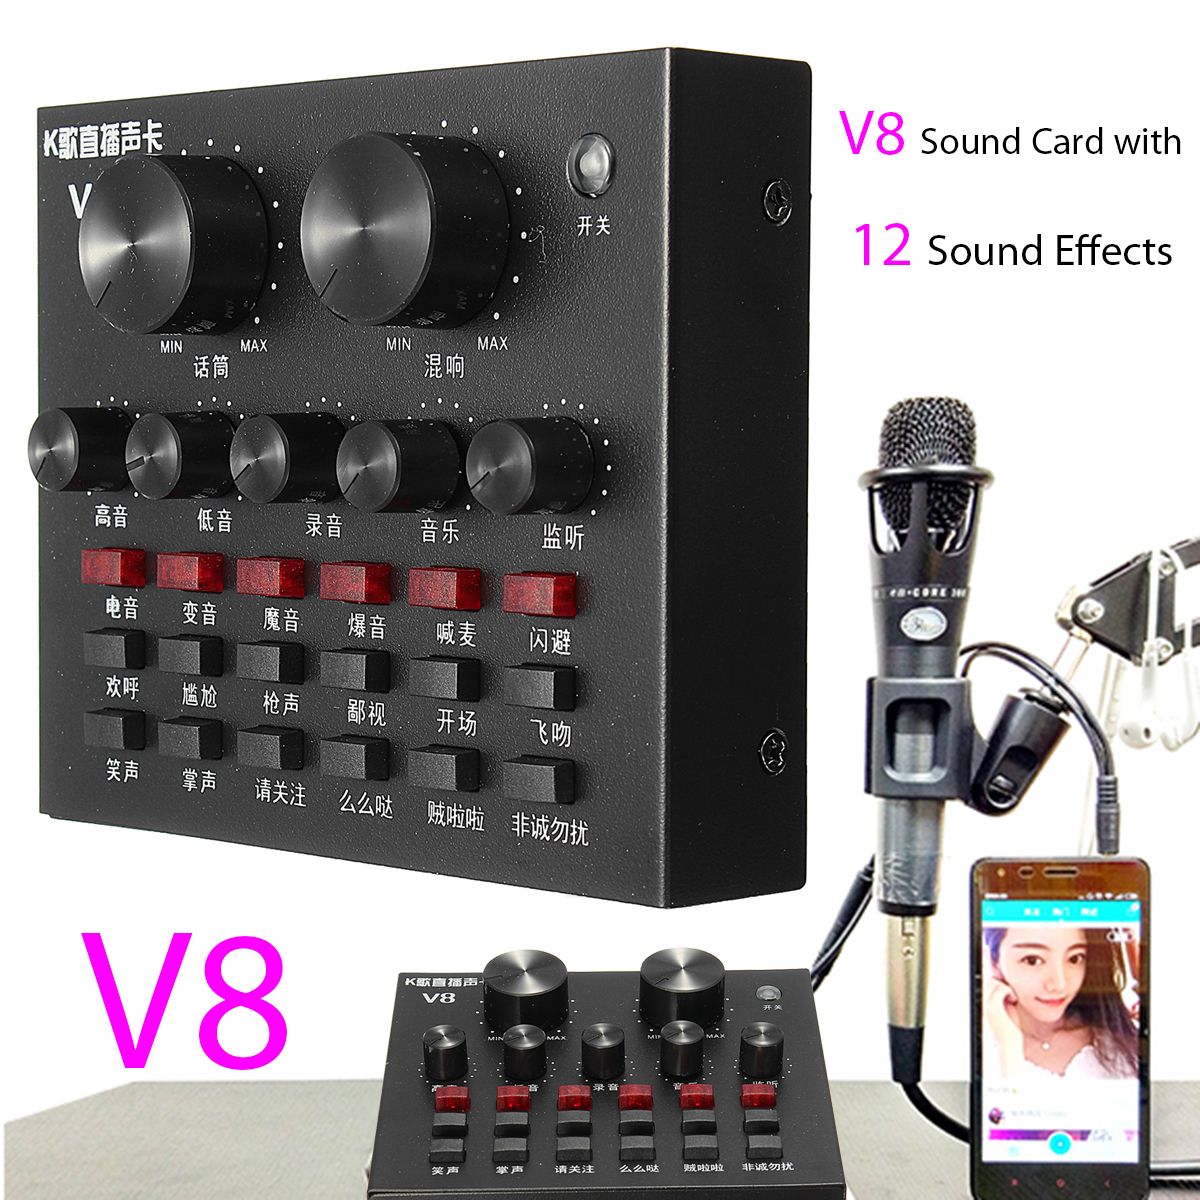 V8-Noise-Reduction-12-Sound-Effect-Audio-Mixing-Mixer-Console-Sound-Card-1422910